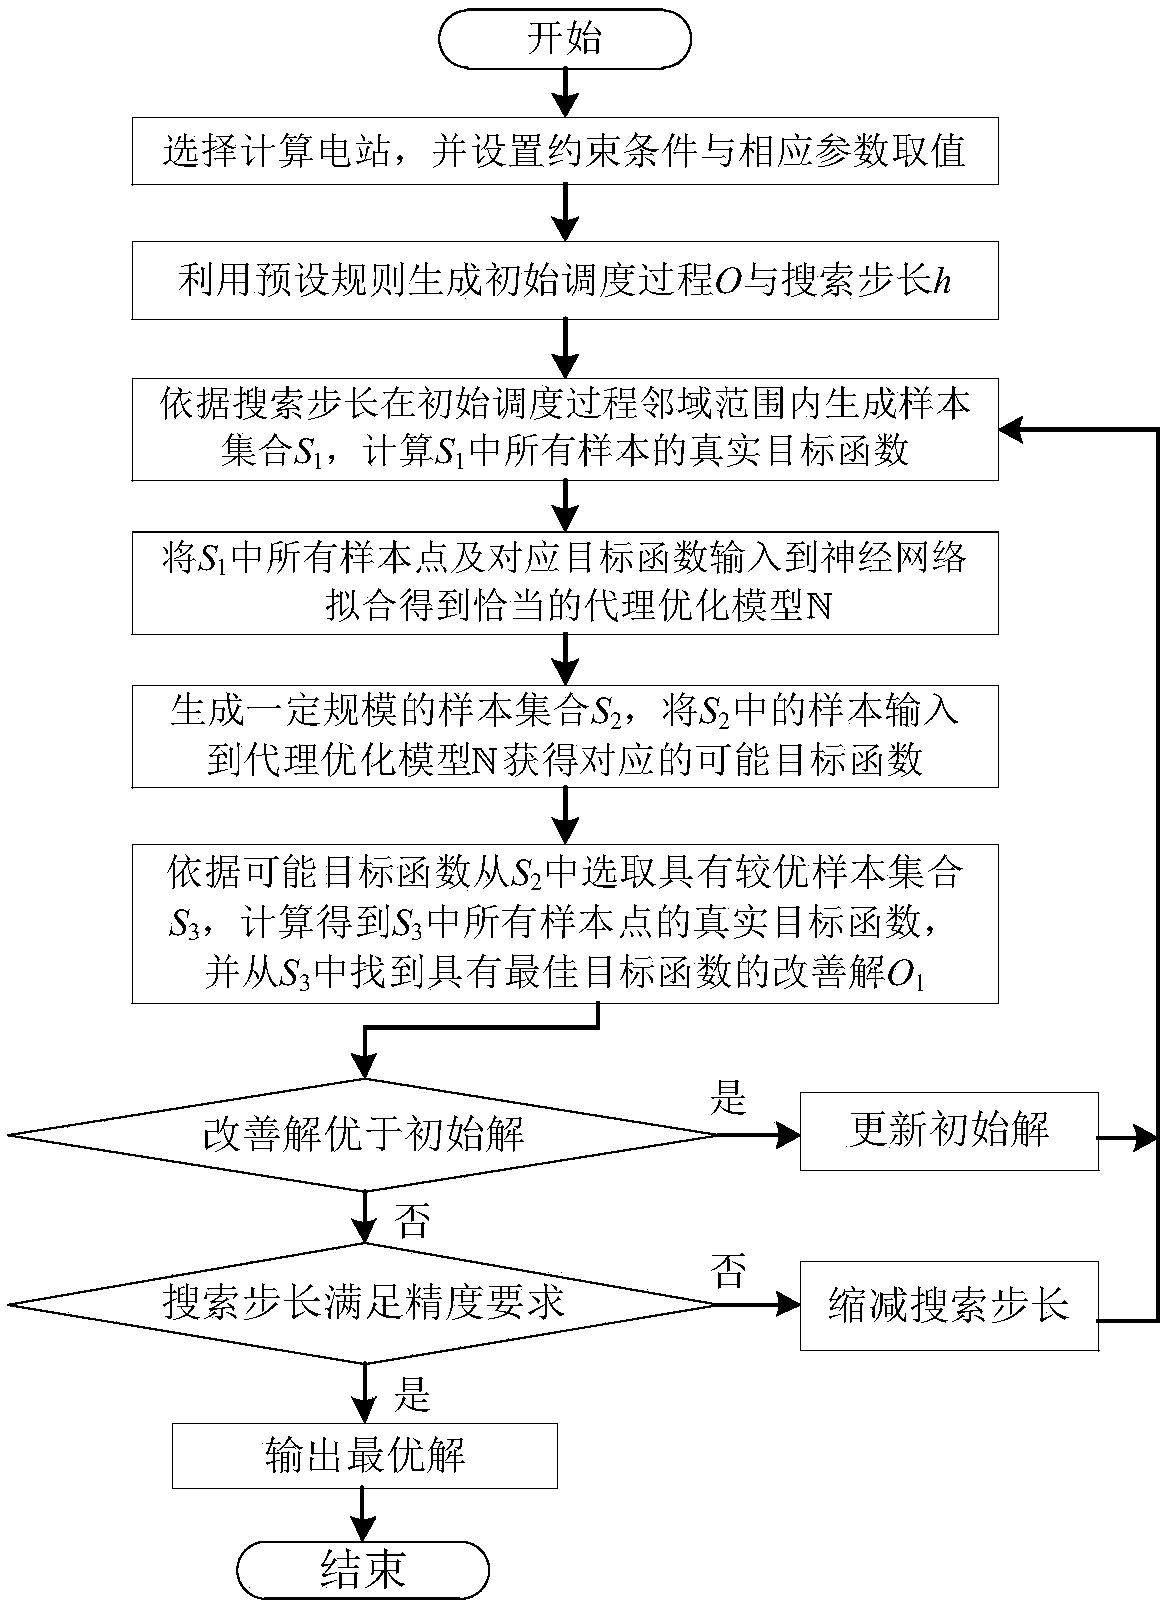 Agency optimization dimension reduction method for combined scheduling of reservoir group of large-scale hydropower station